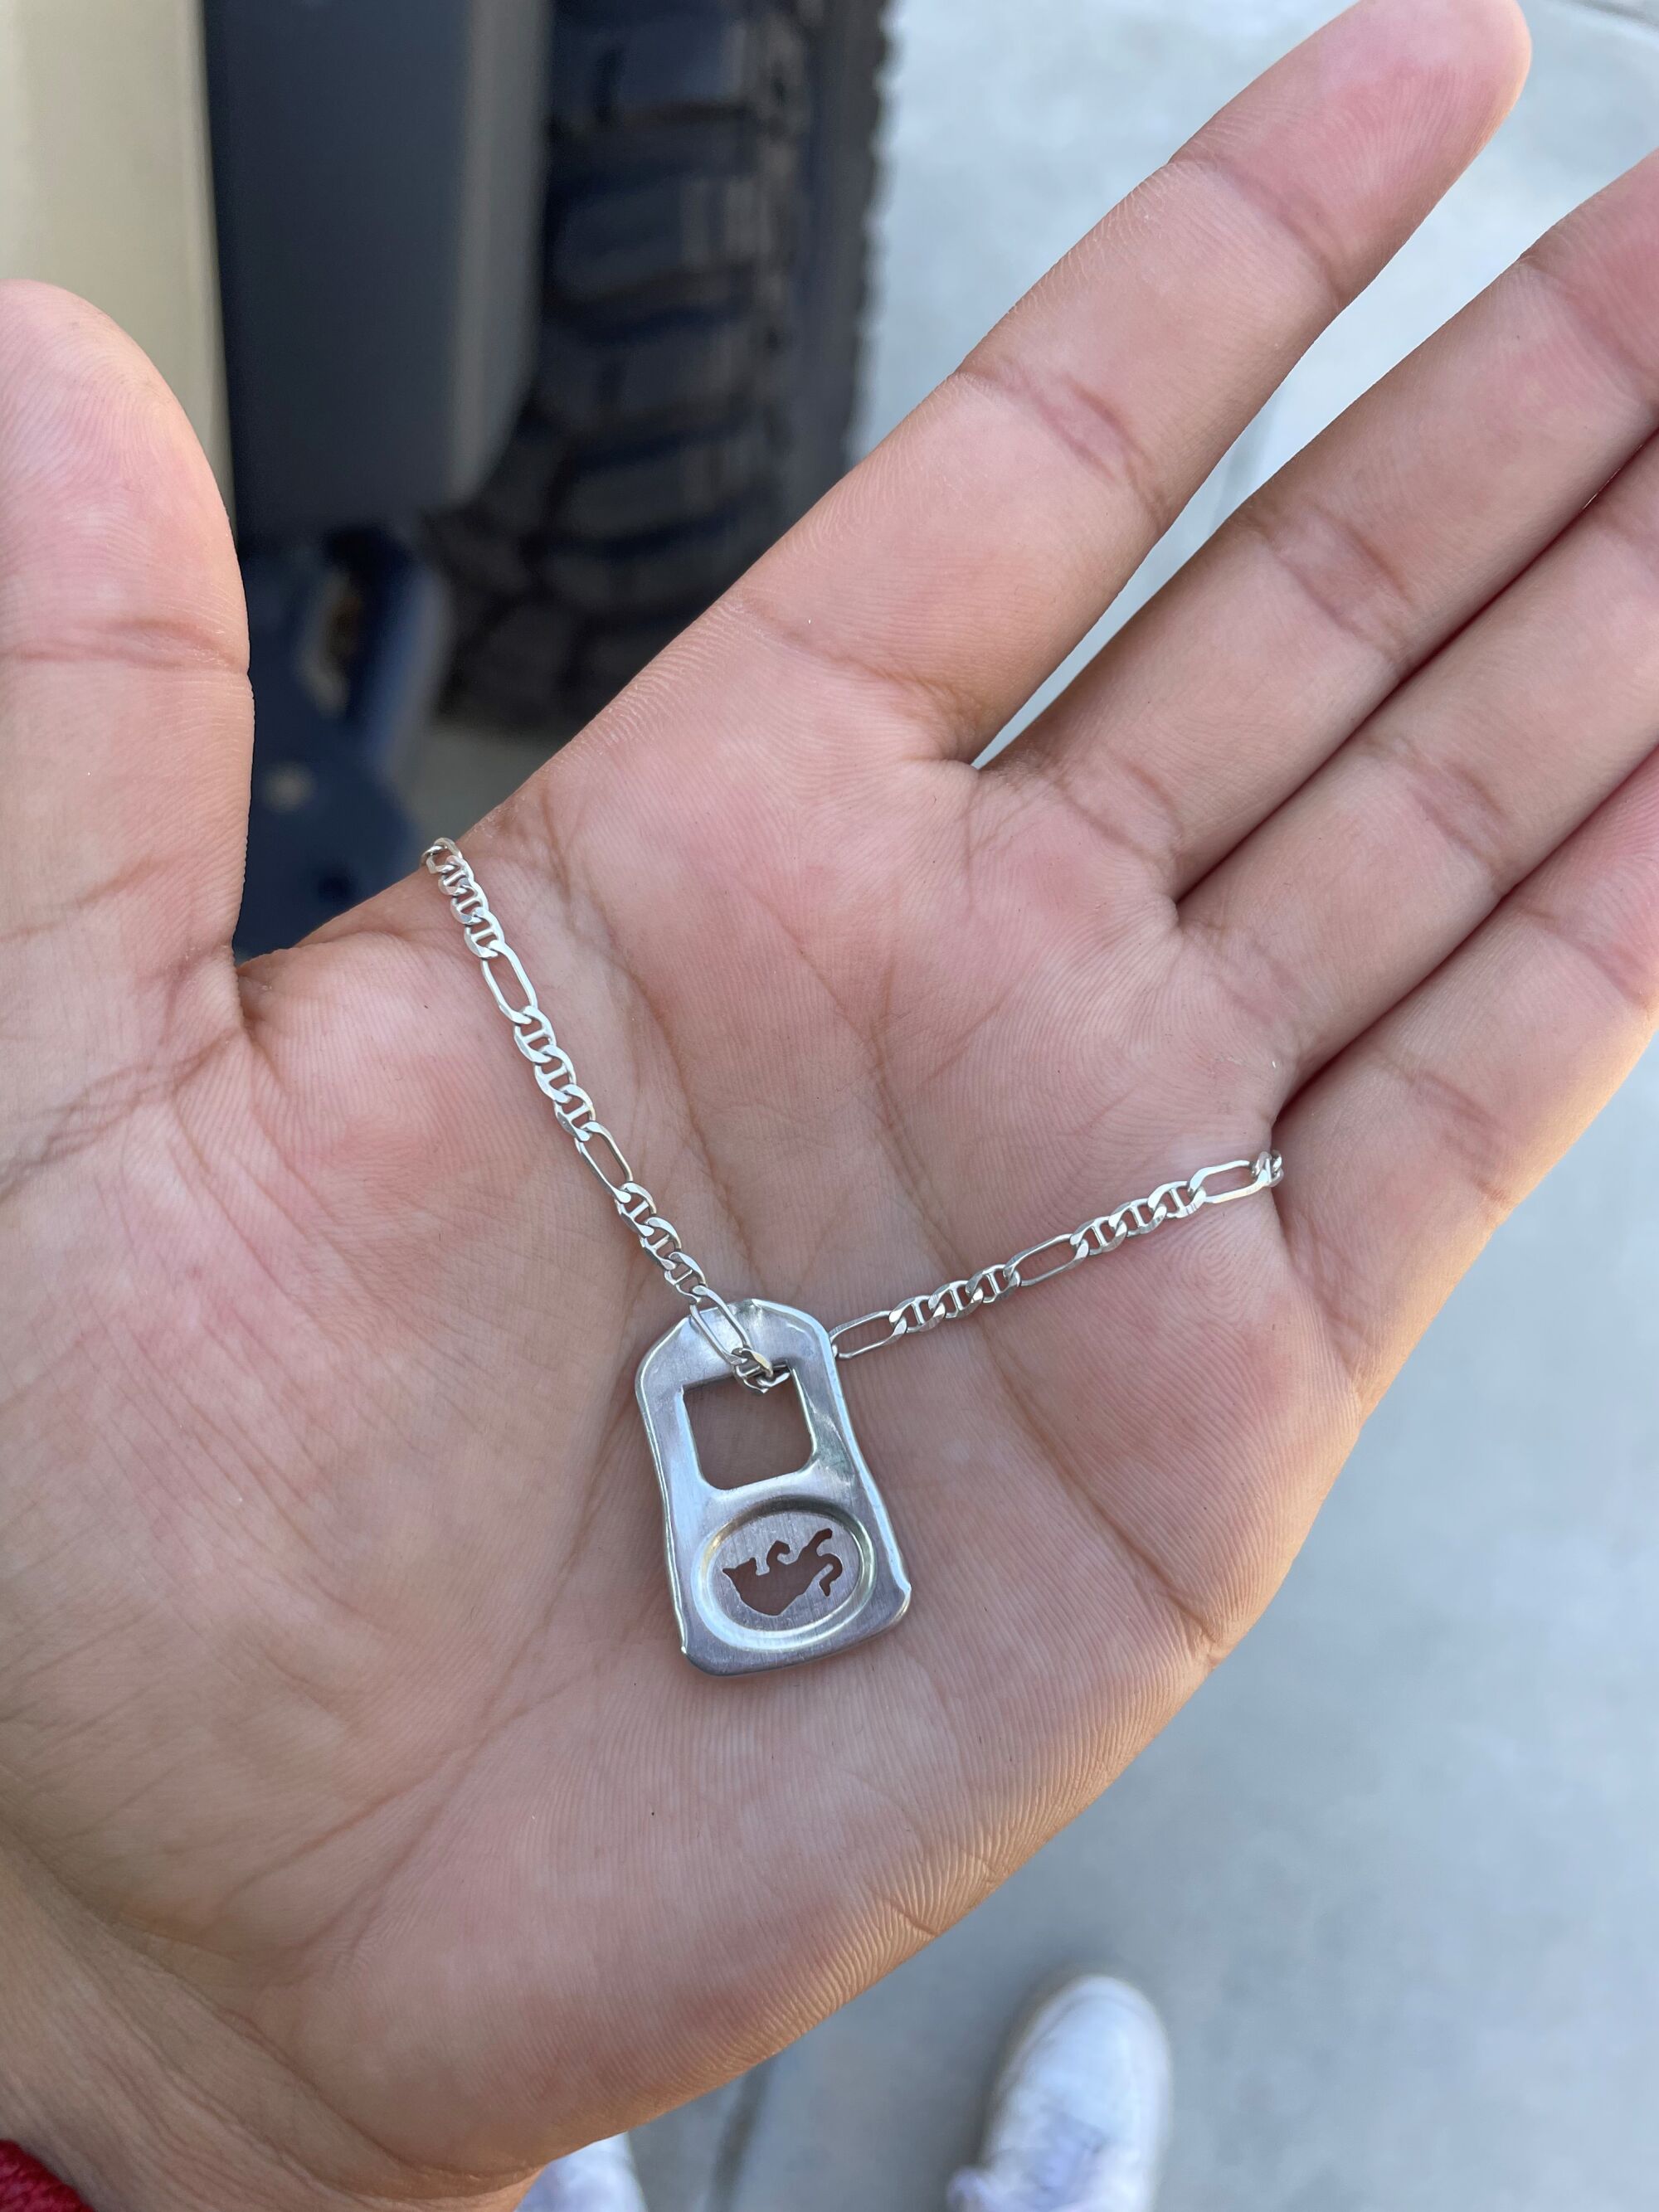 A hand holding a silver necklace with a drink can tab on it.